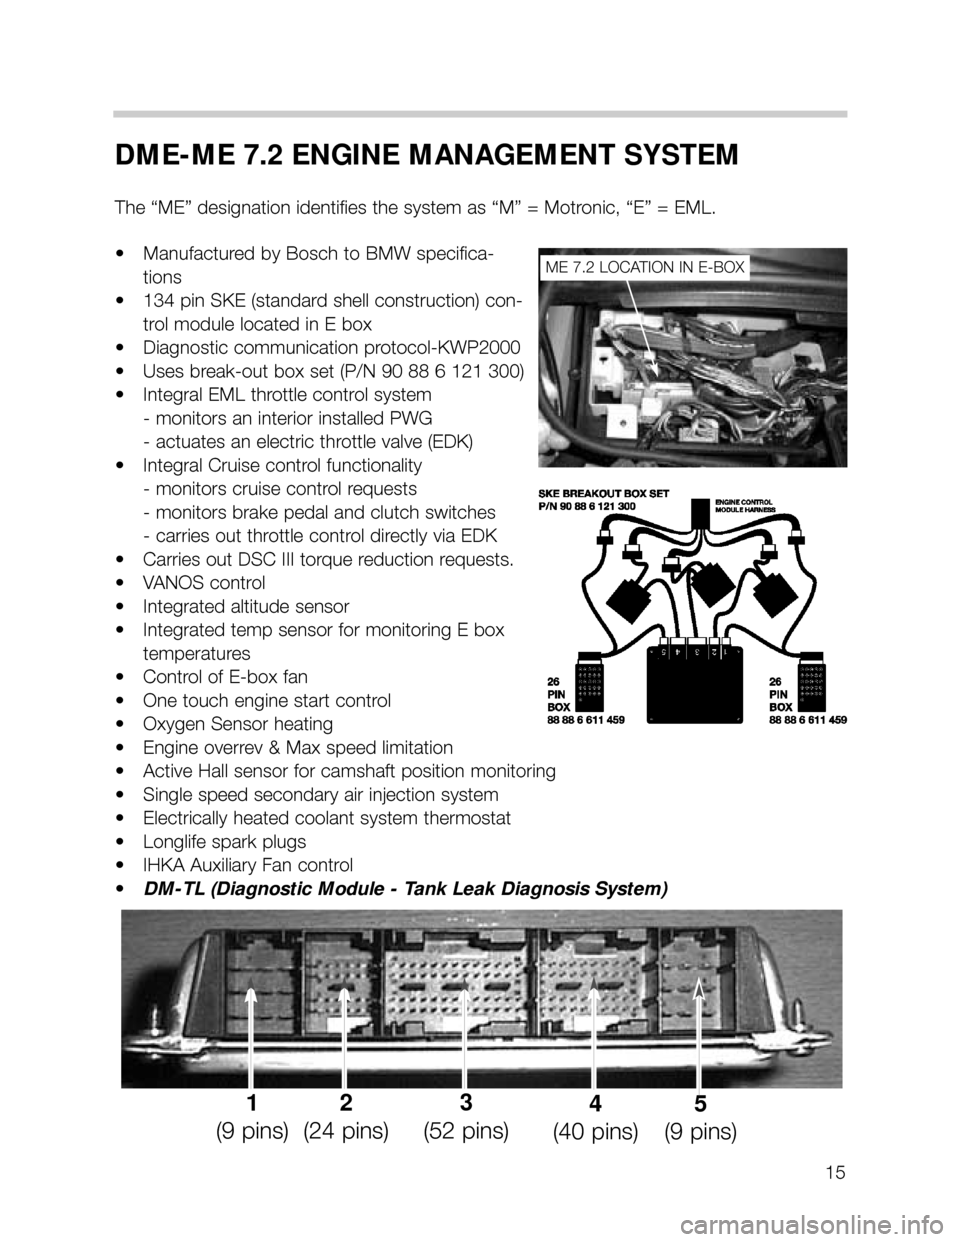 BMW 735i 2000 E38 M62TU Engine Workshop Manual 15
DME-ME 7.2 ENGINE MANAGEMENT SYSTEM
The “ME” designation identifies the system as “M” = Motronic, “E” = EML.
• Manufactured by Bosch to BMW specifica-
tions
• 134 pin SKE (standard 